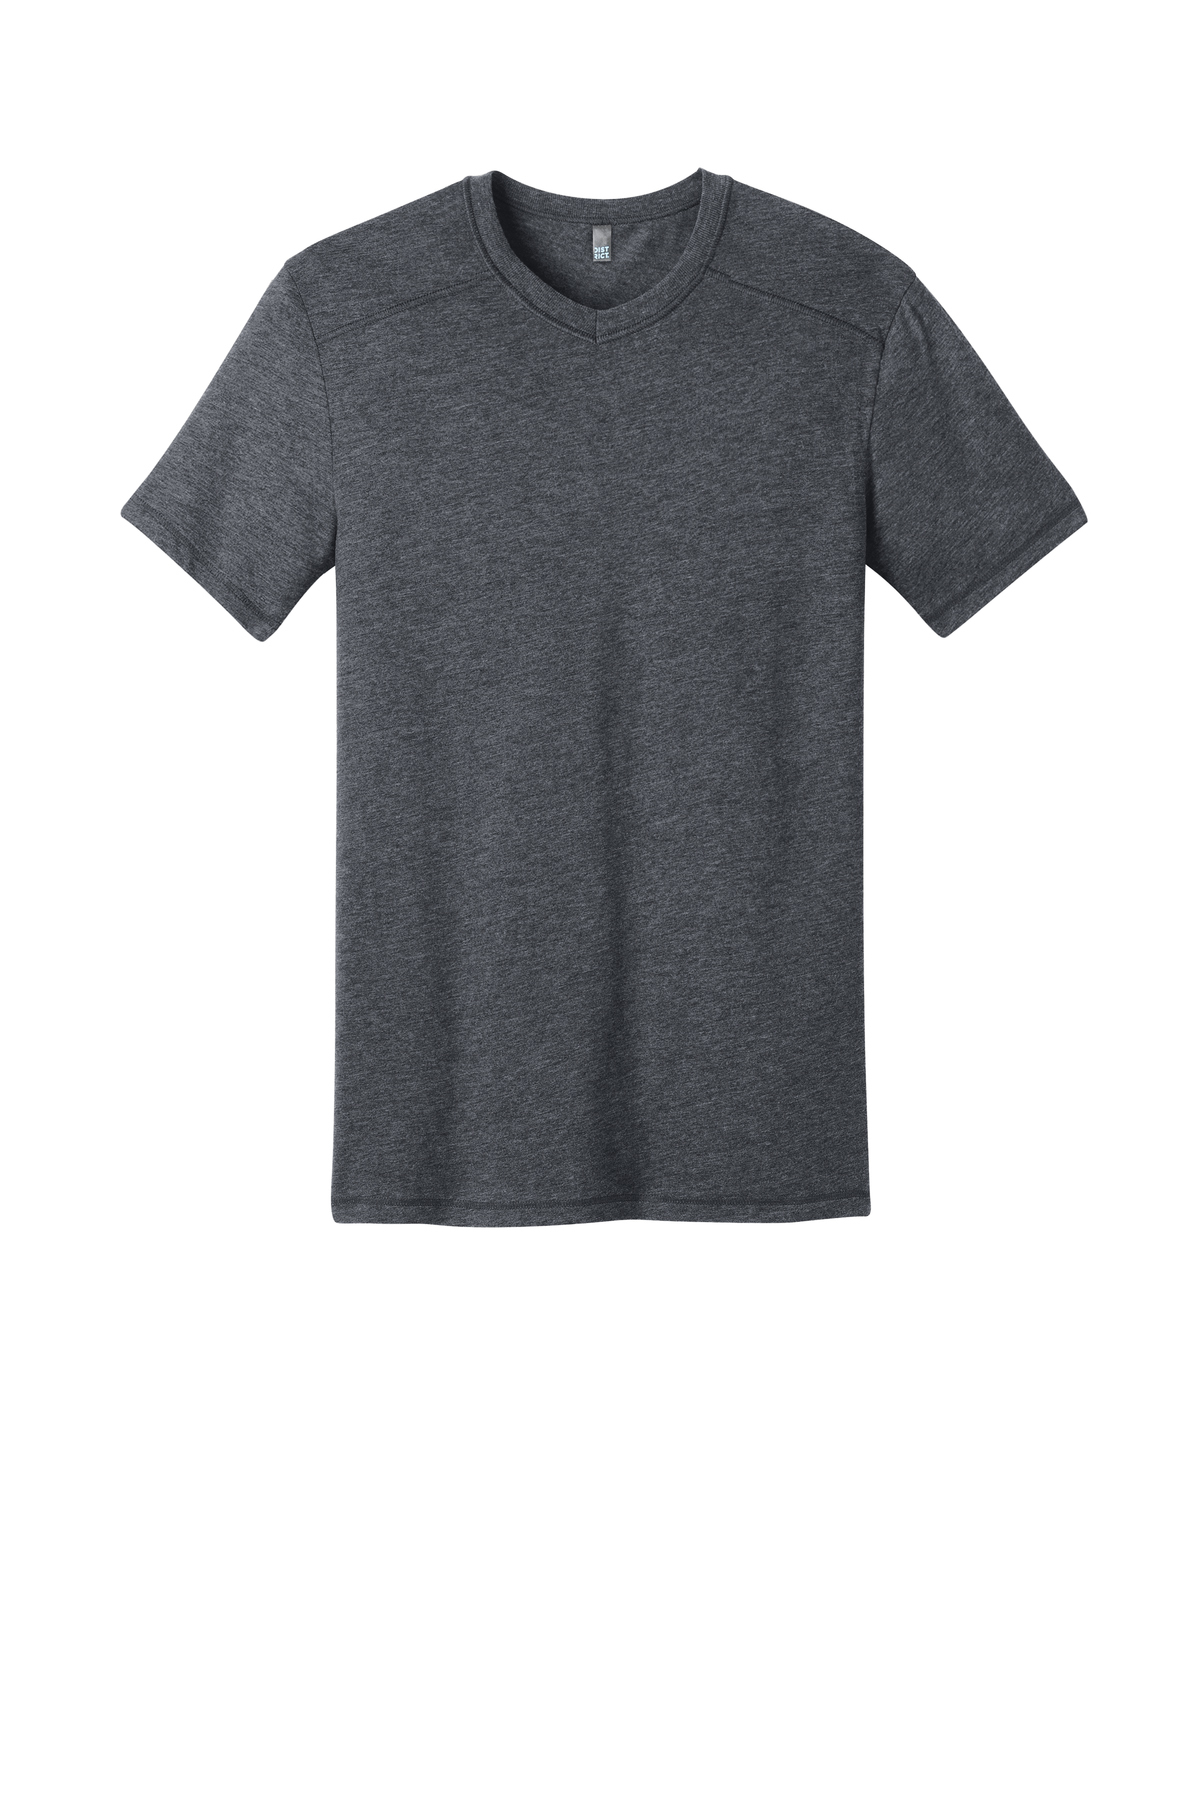 District - Young Mens Gravel 50/50 Notch Crew Tee | Product | SanMar